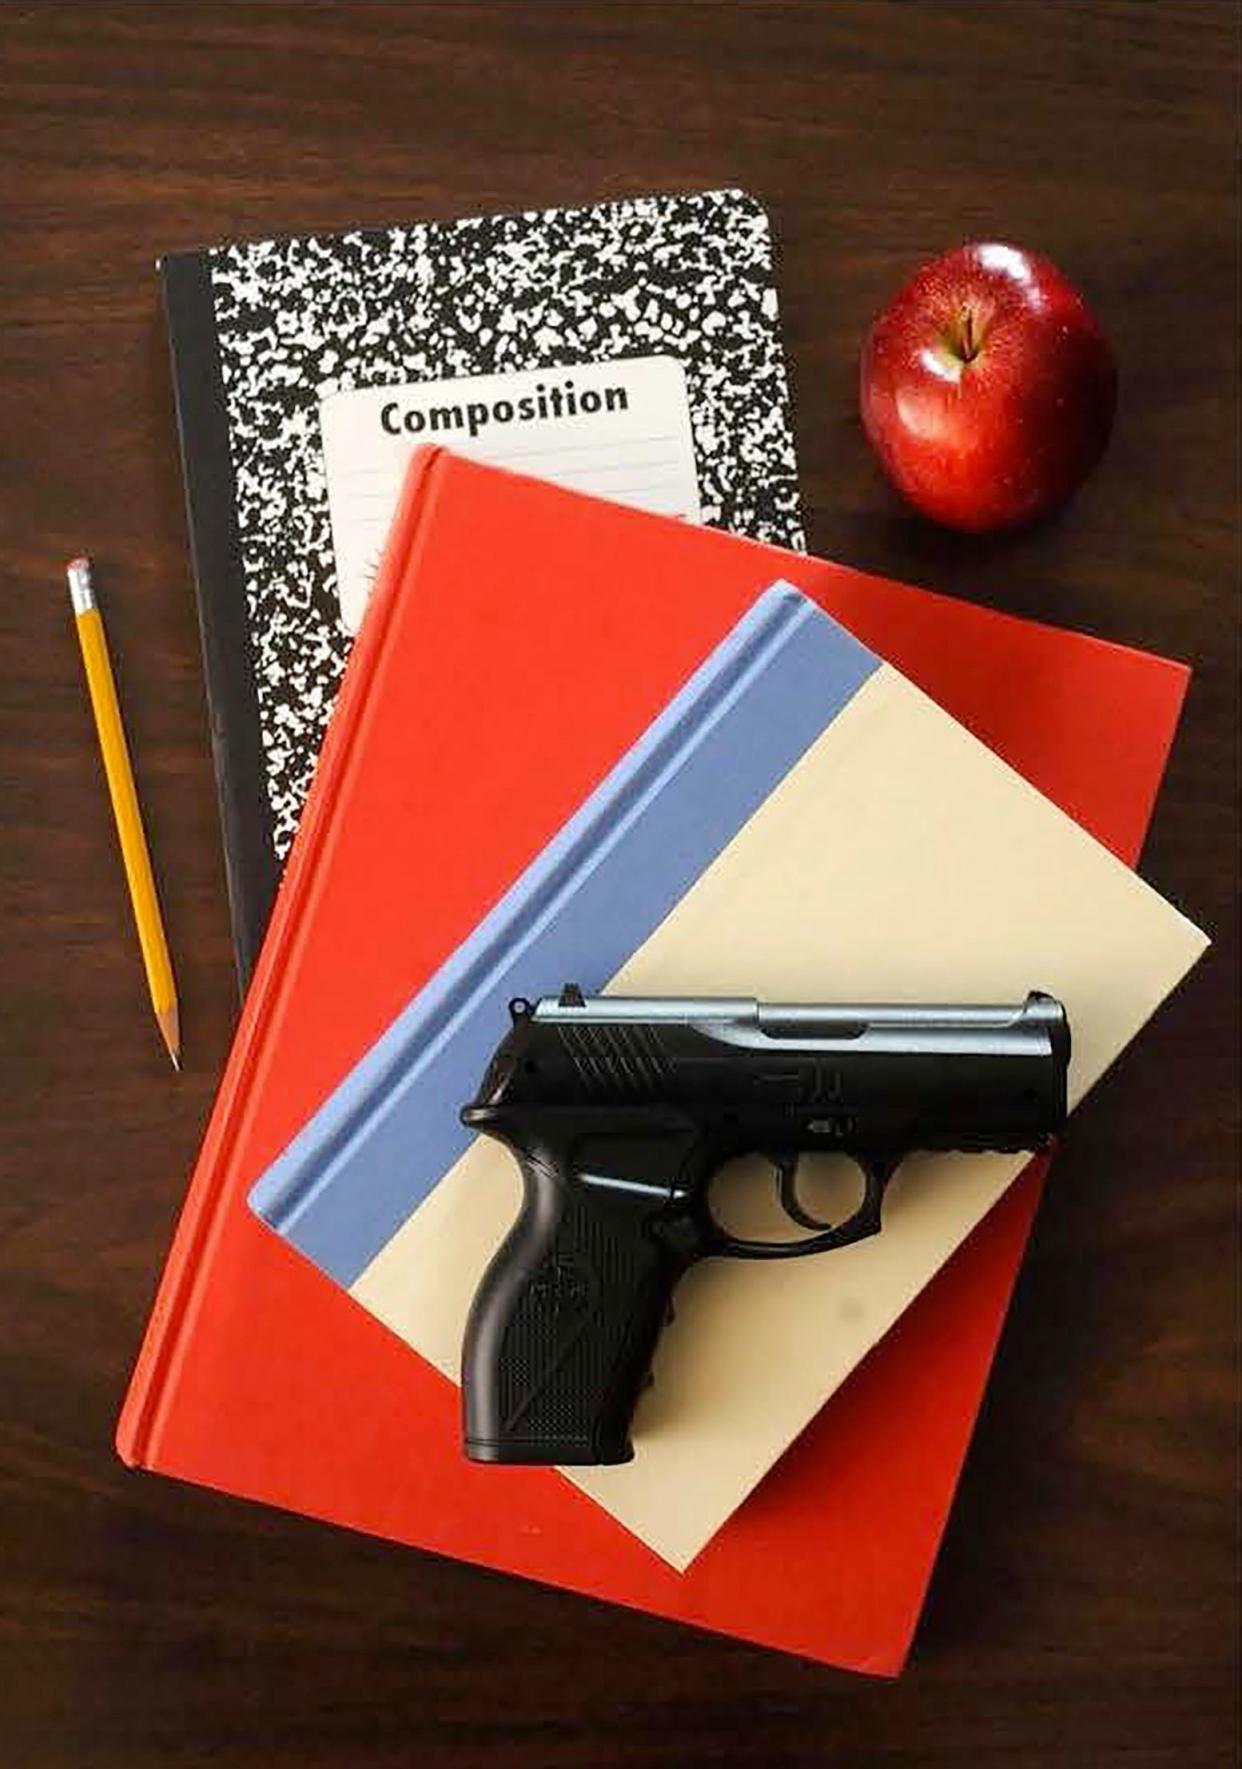 The Claymont Board of Education is considering whether to allow employees to voluntarily carry guns on school property.